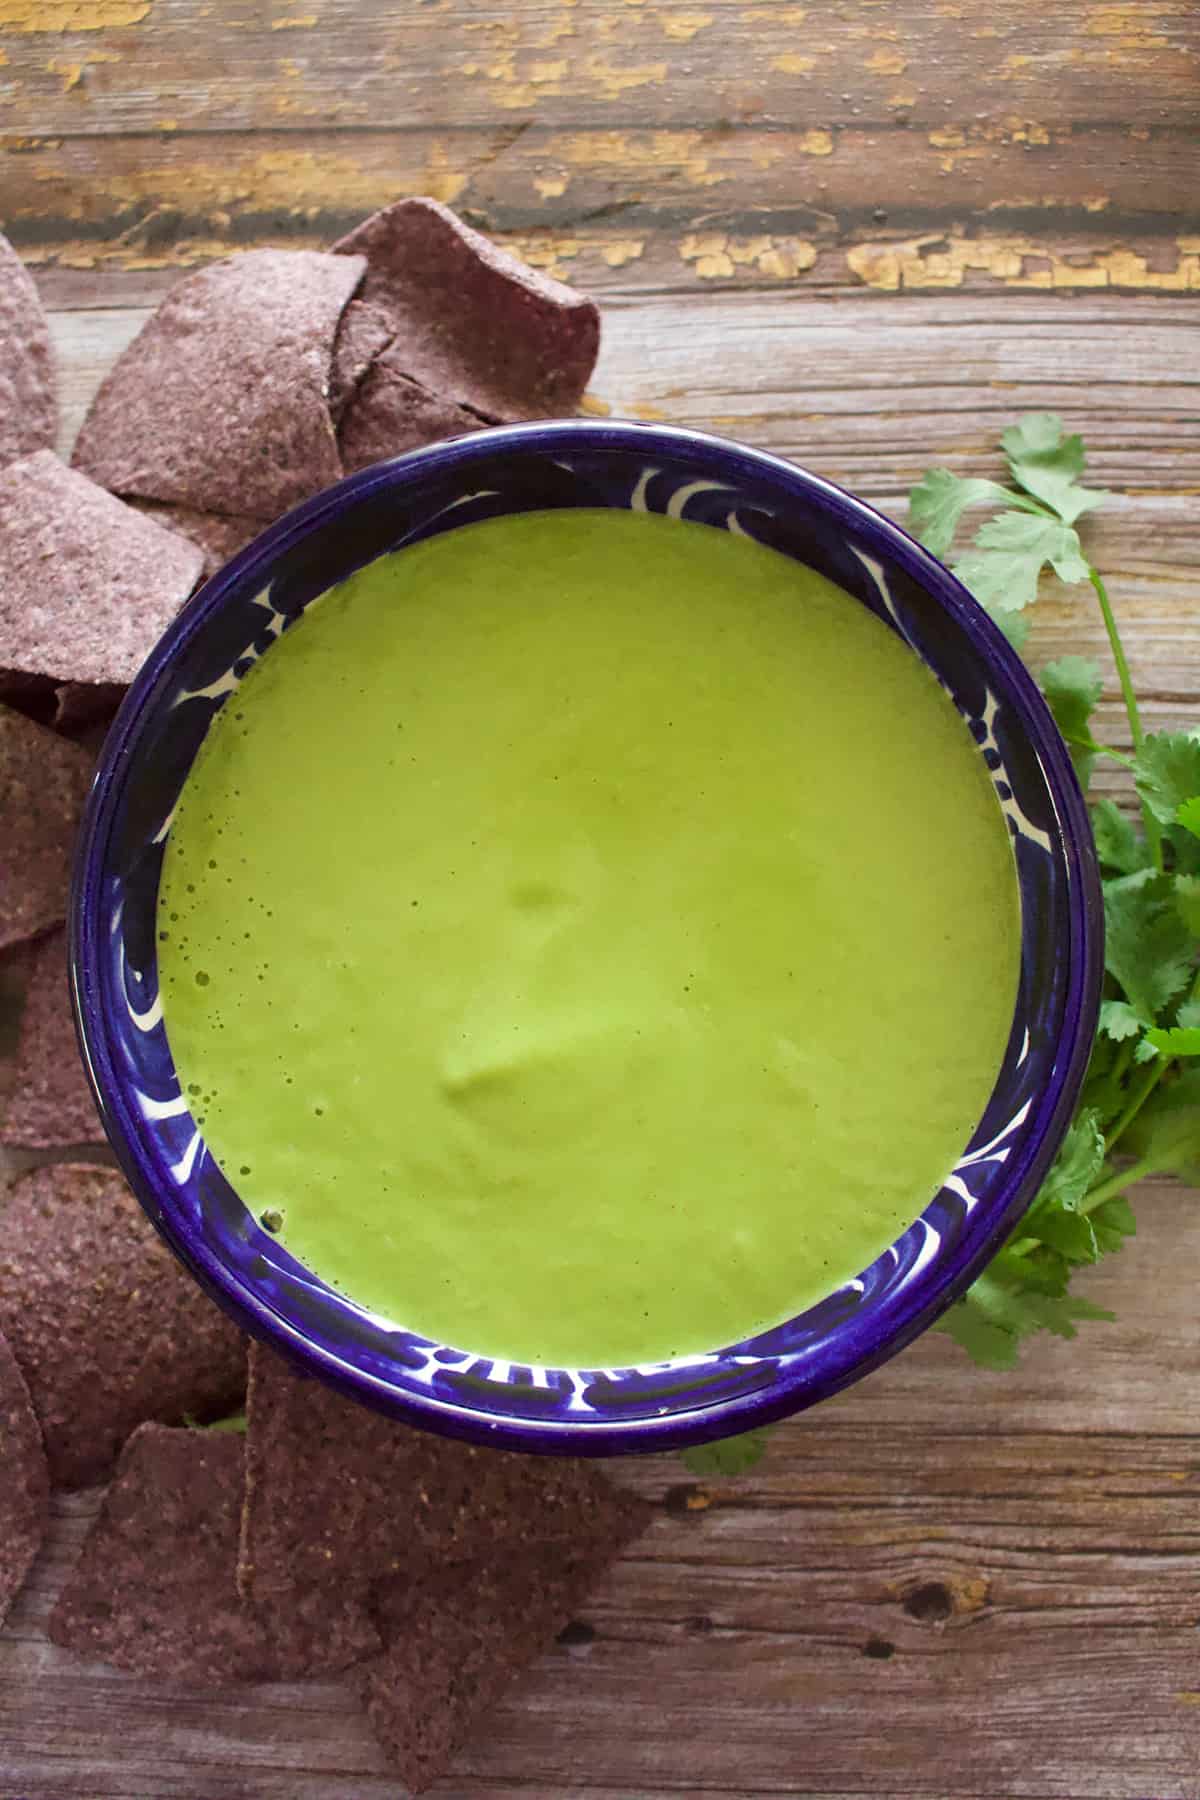 A bowl of jalapeno salsa next to chips and cilantro.